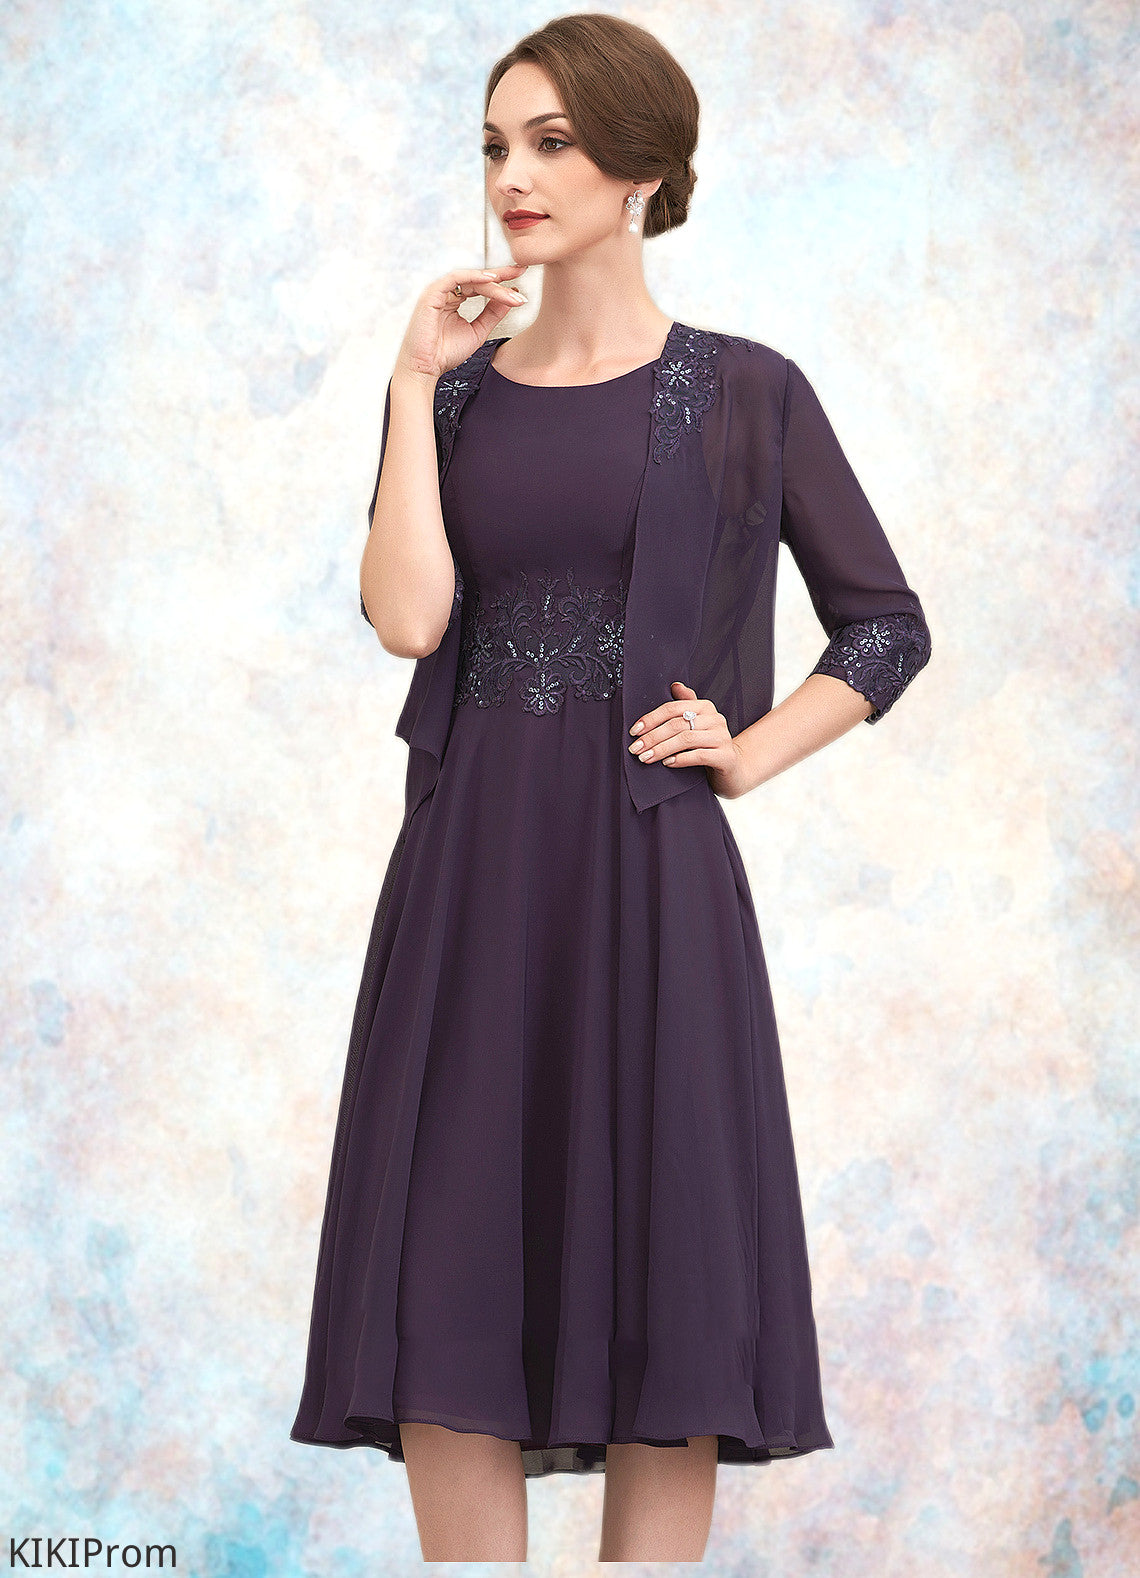 Lucy A-Line Scoop Neck Knee-Length Chiffon Lace Mother of the Bride Dress With Sequins DZ126P0014968